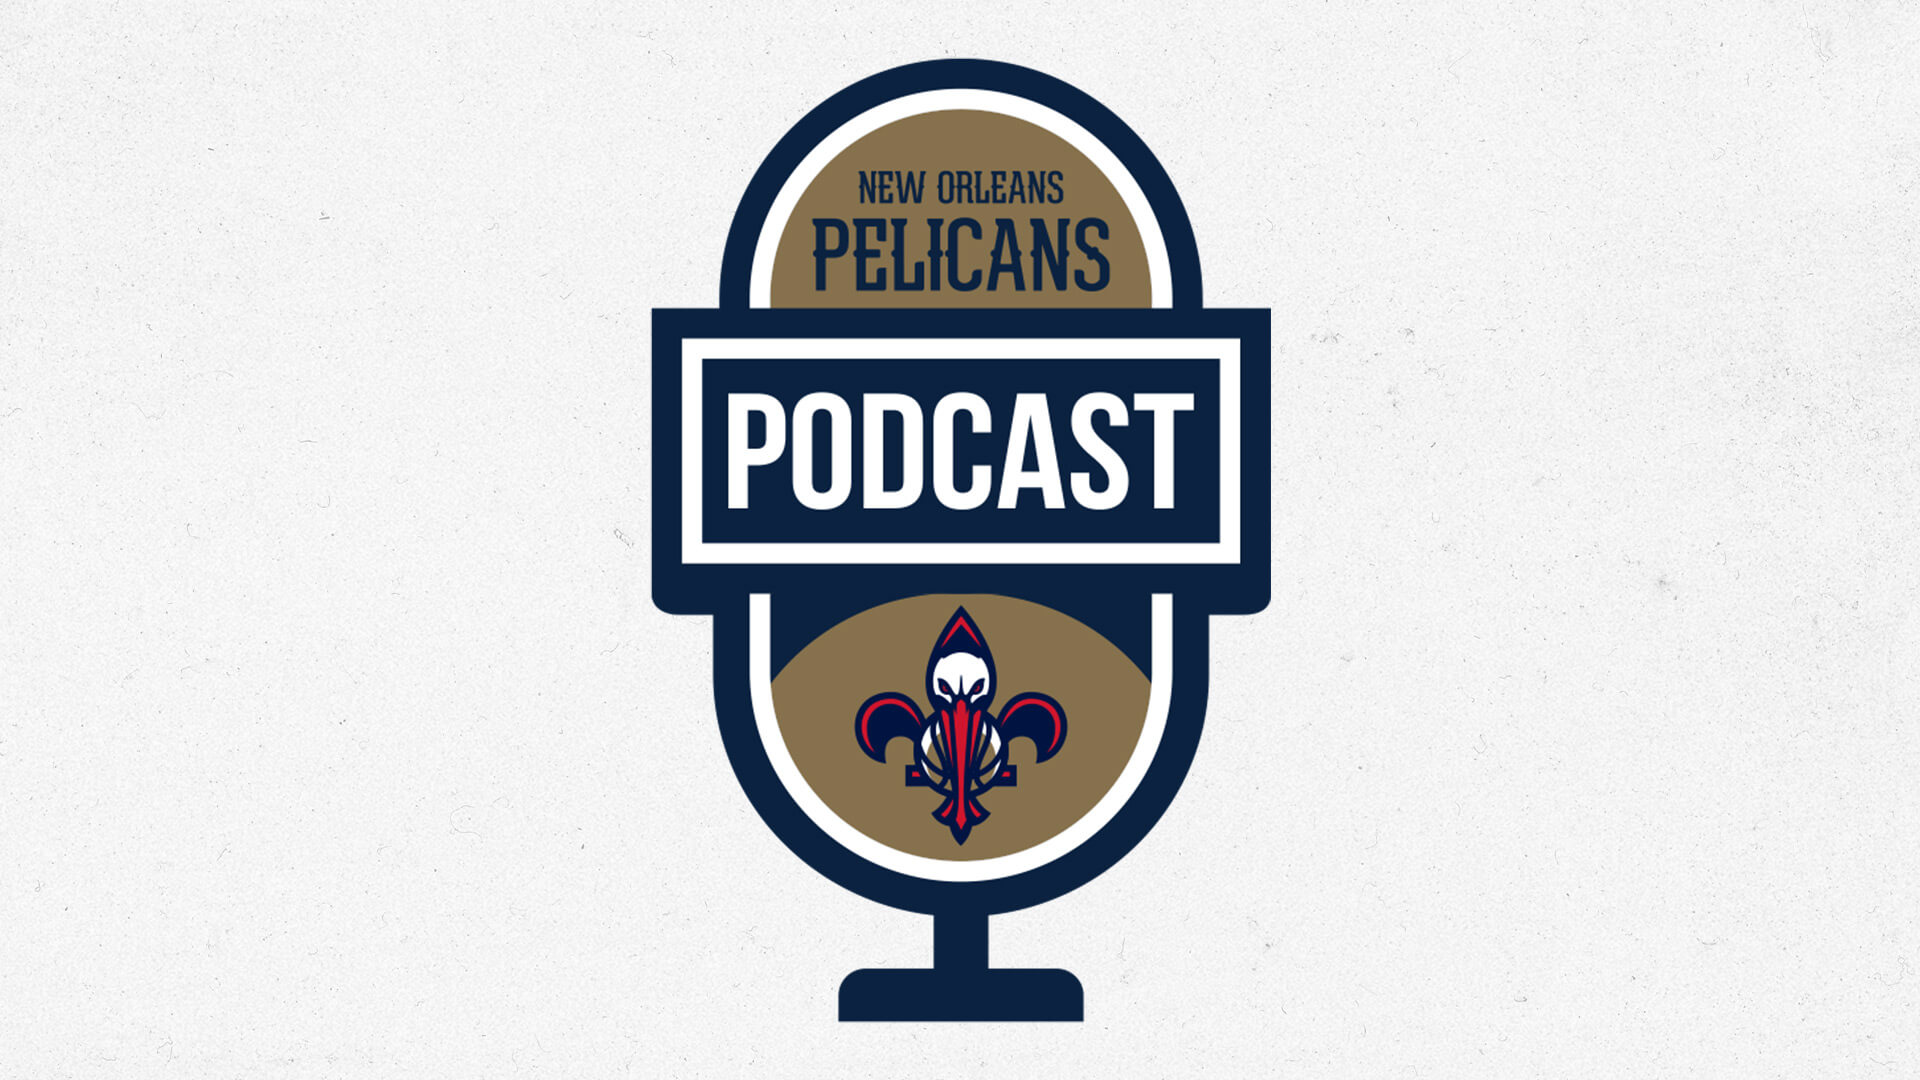 Erin Hartigan on the New Orleans Pelicans Podcast presented by SeatGeek - April 28, 2022